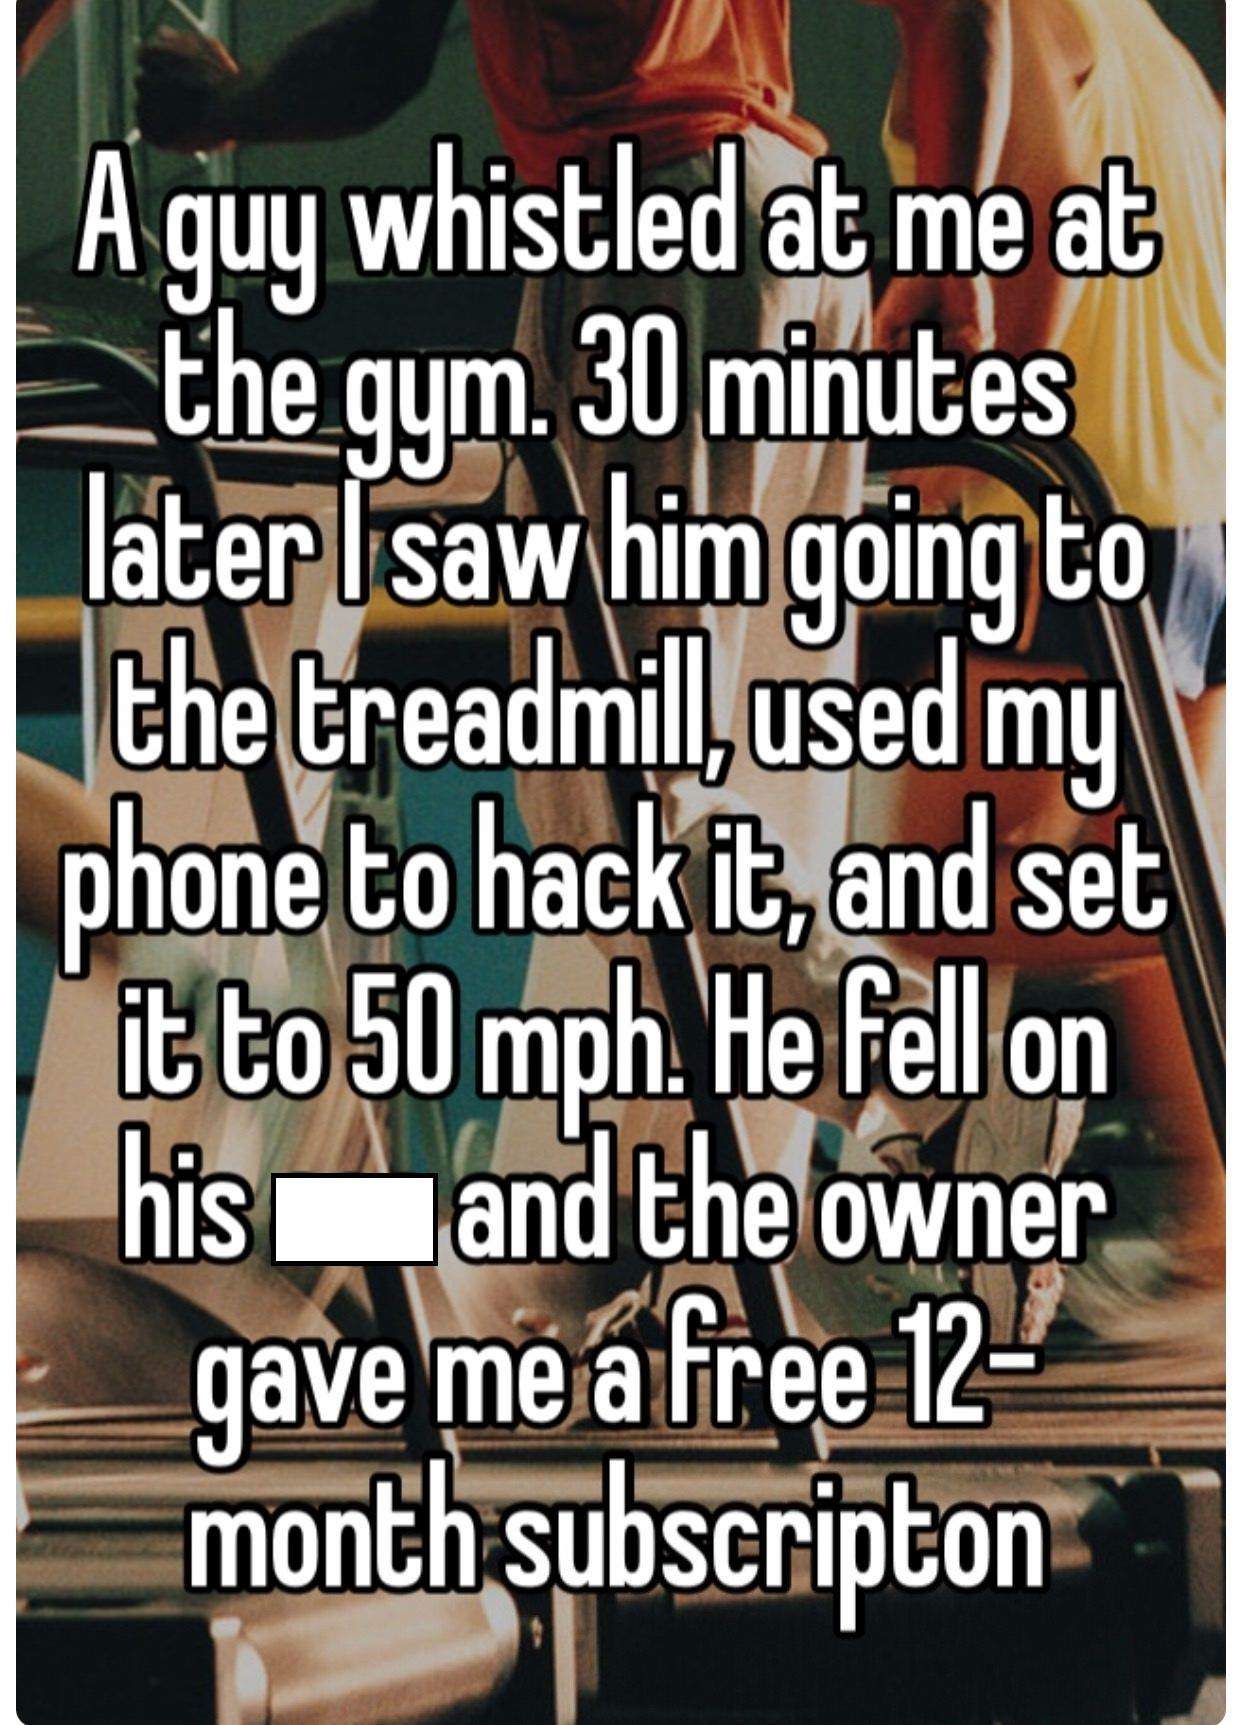 Gym - A guy whistled at me at |_the gym. 30 minutes later I saw him going to the treadmill, used my phone to hack it, and set it to 50 mph. He fell on his and the owner gave me a free 12 month subscripton